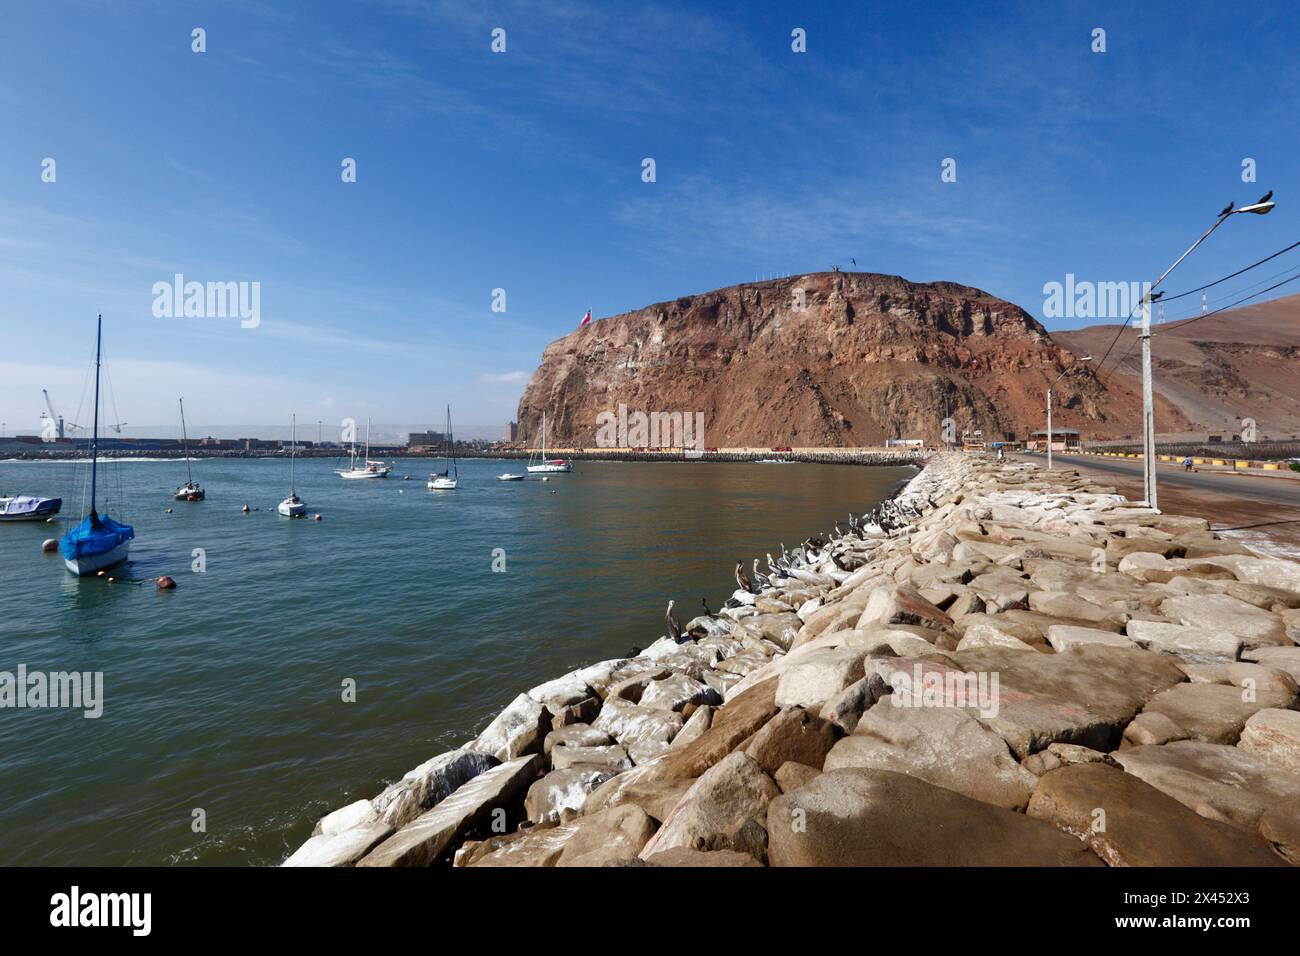 Rock armour revetment preventing coastal erosion next to causeway connecting Alacrán Island to mainland and El Morro headland, Arica, Chile Stock Photo